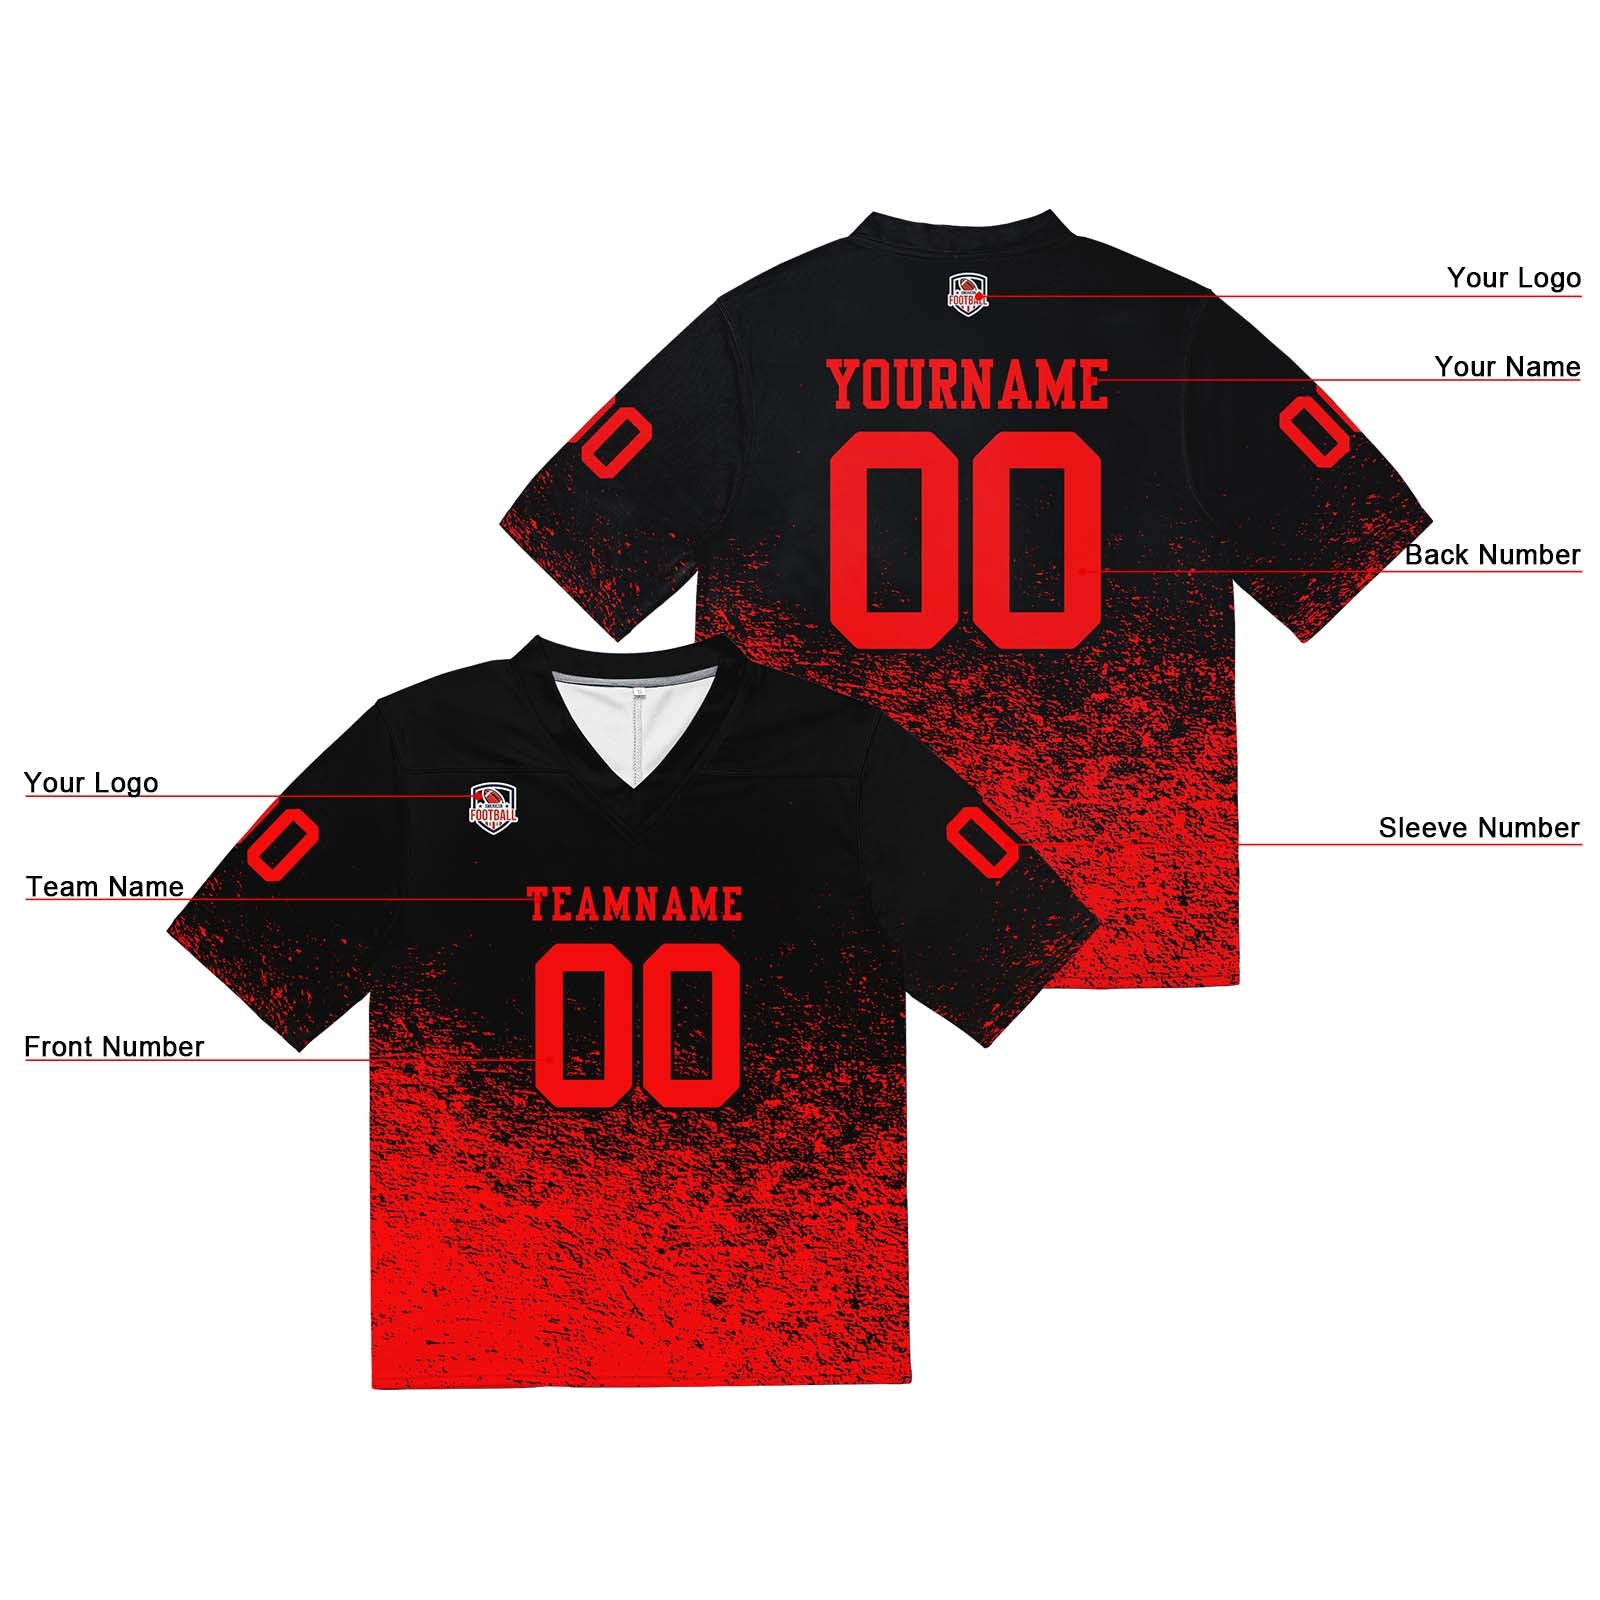 Custom Football Jersey Shirt Personalized Stitched Printed Team Name Number Black & Red